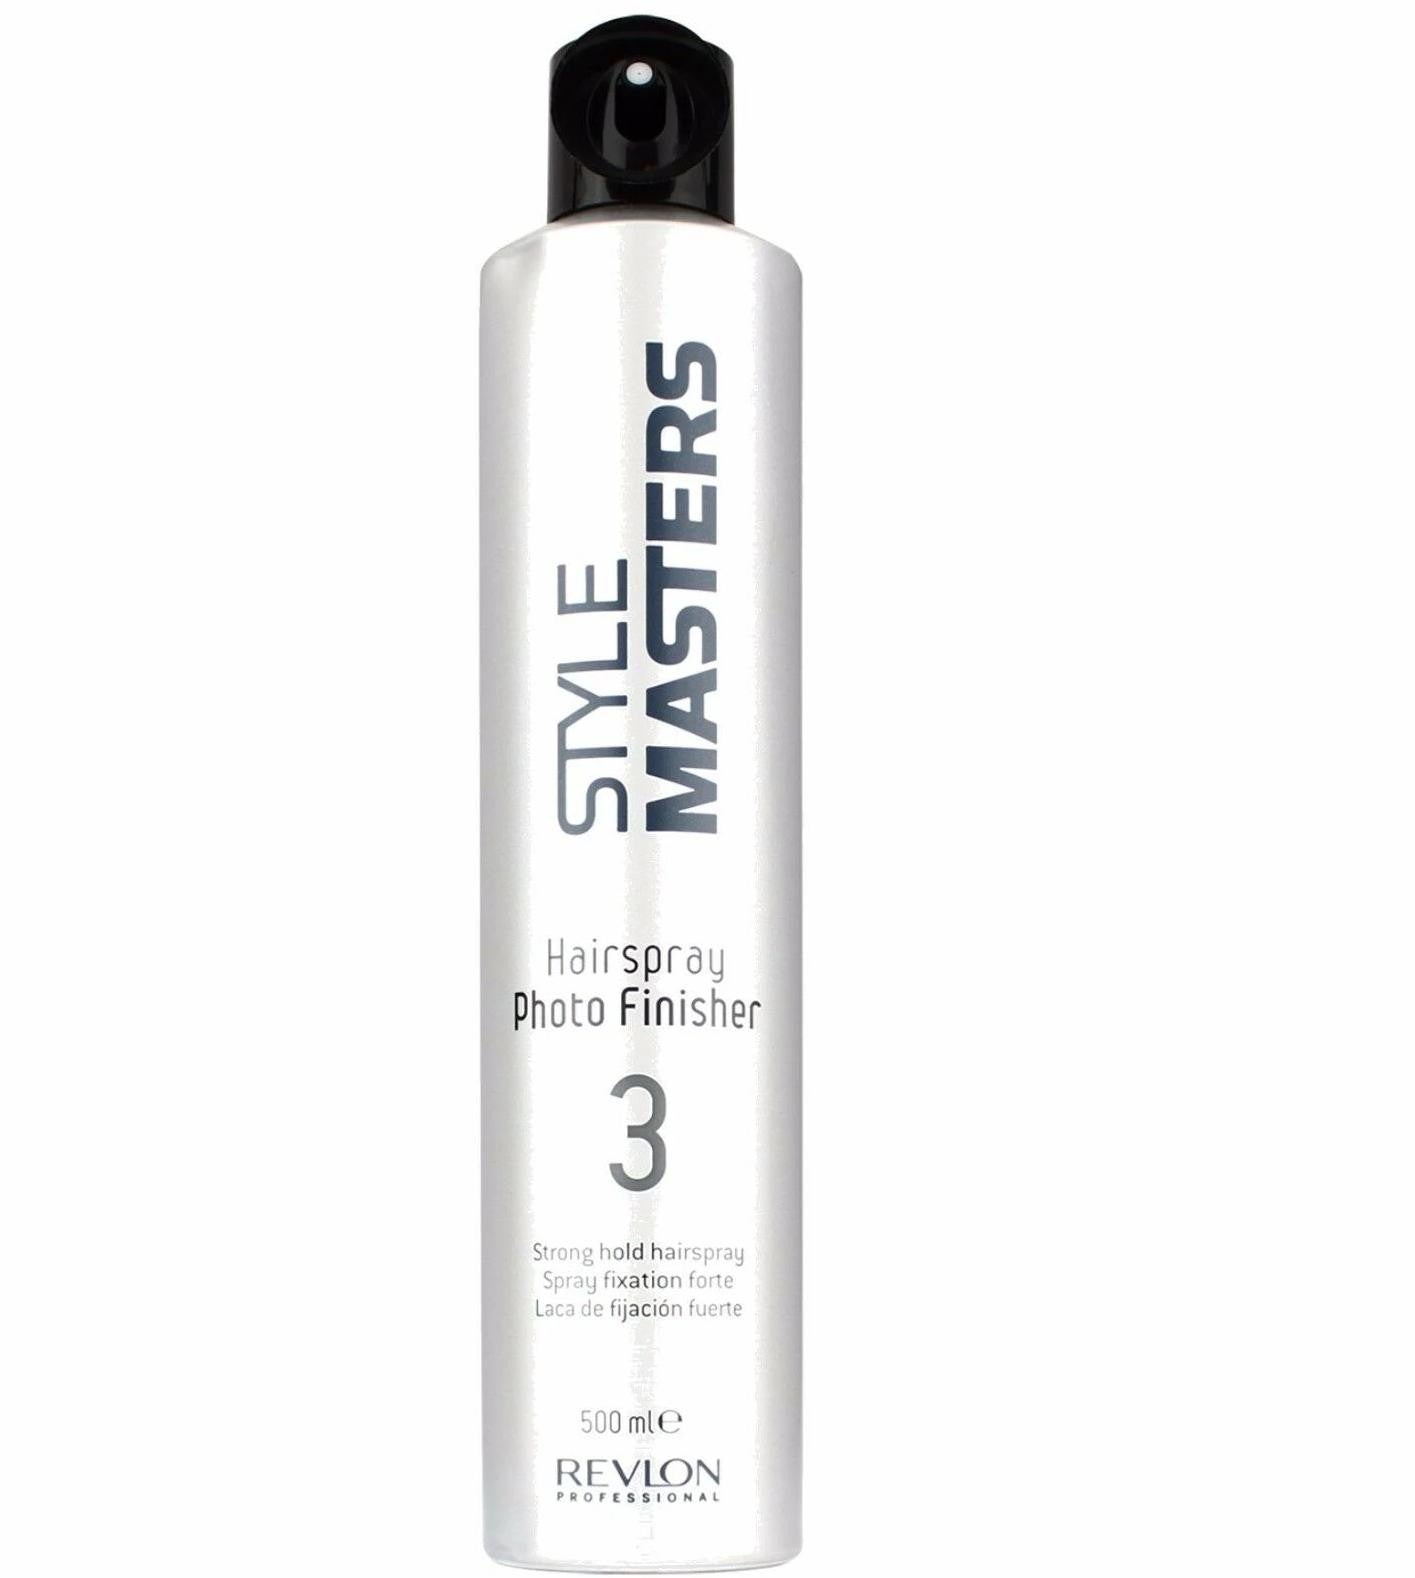 iaahhaircare,REVLON STYLE MASTERS Hairspray Photo Finisher 500ml,Styling Products,Revlon